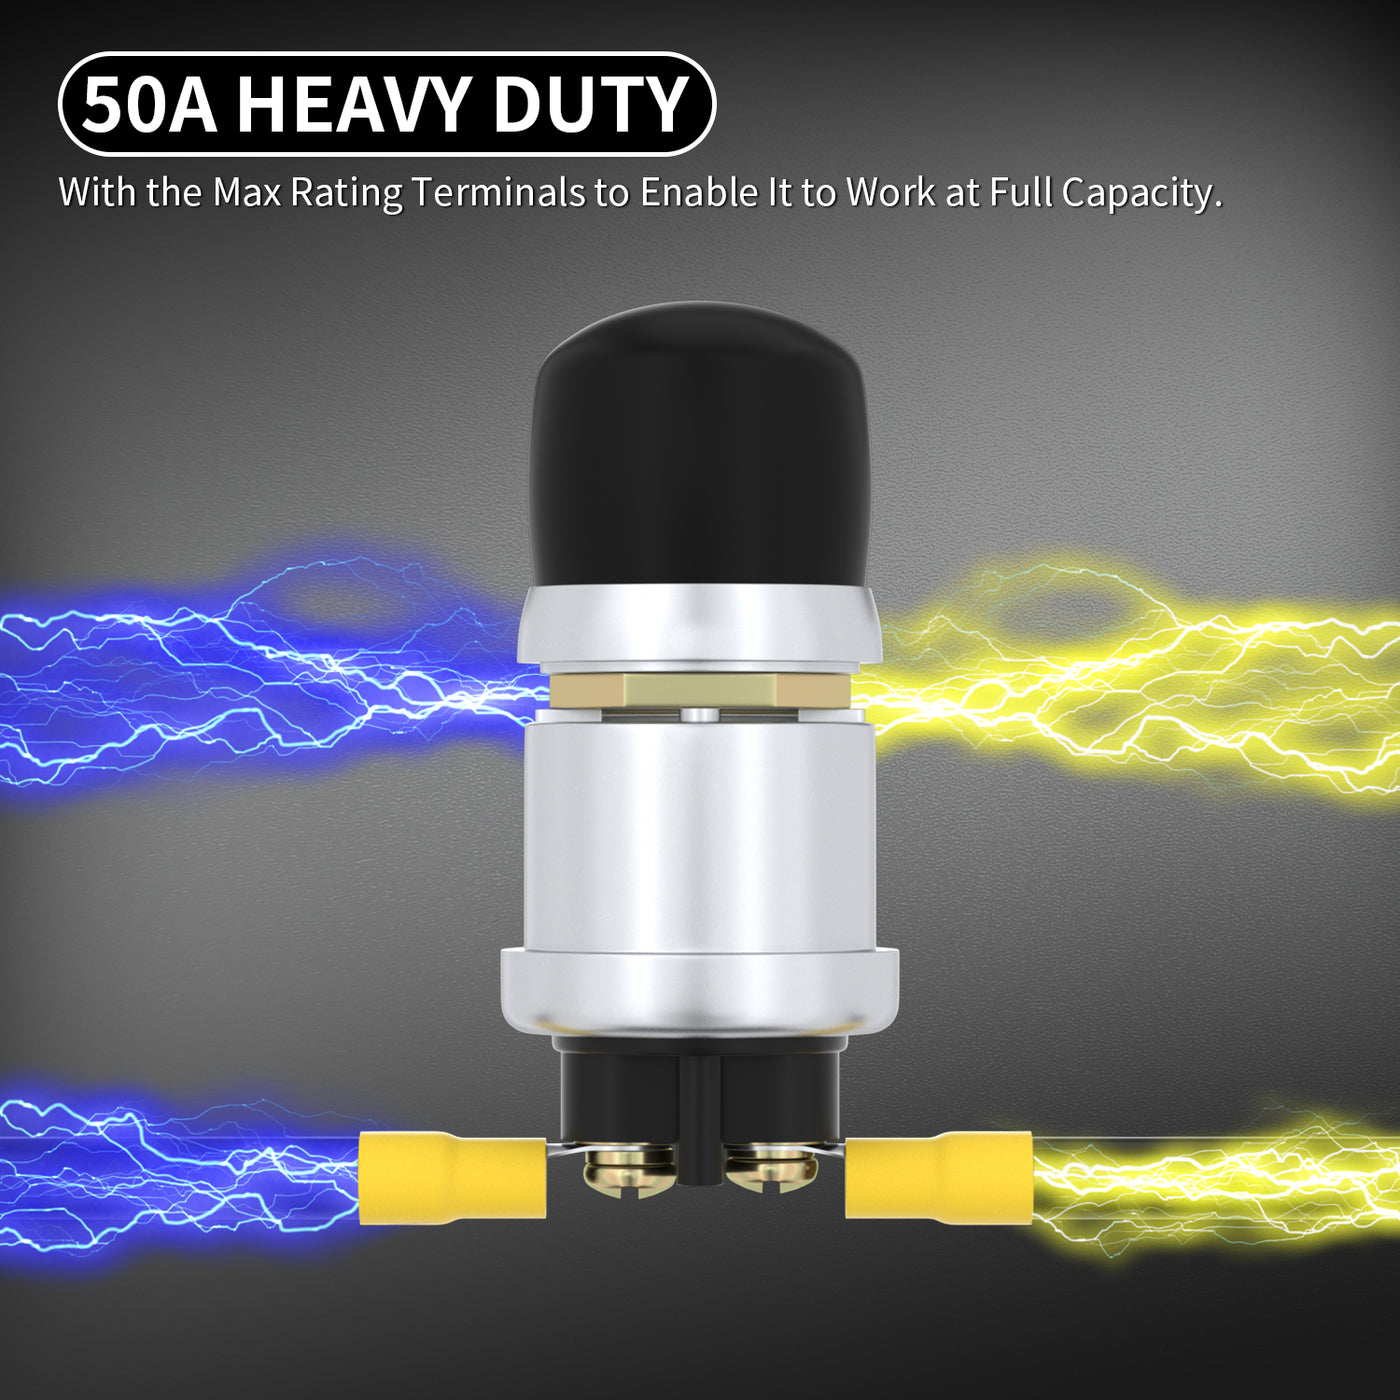 ASW-B05 50A Heavy Duty Momentary Push Button Starter Switch